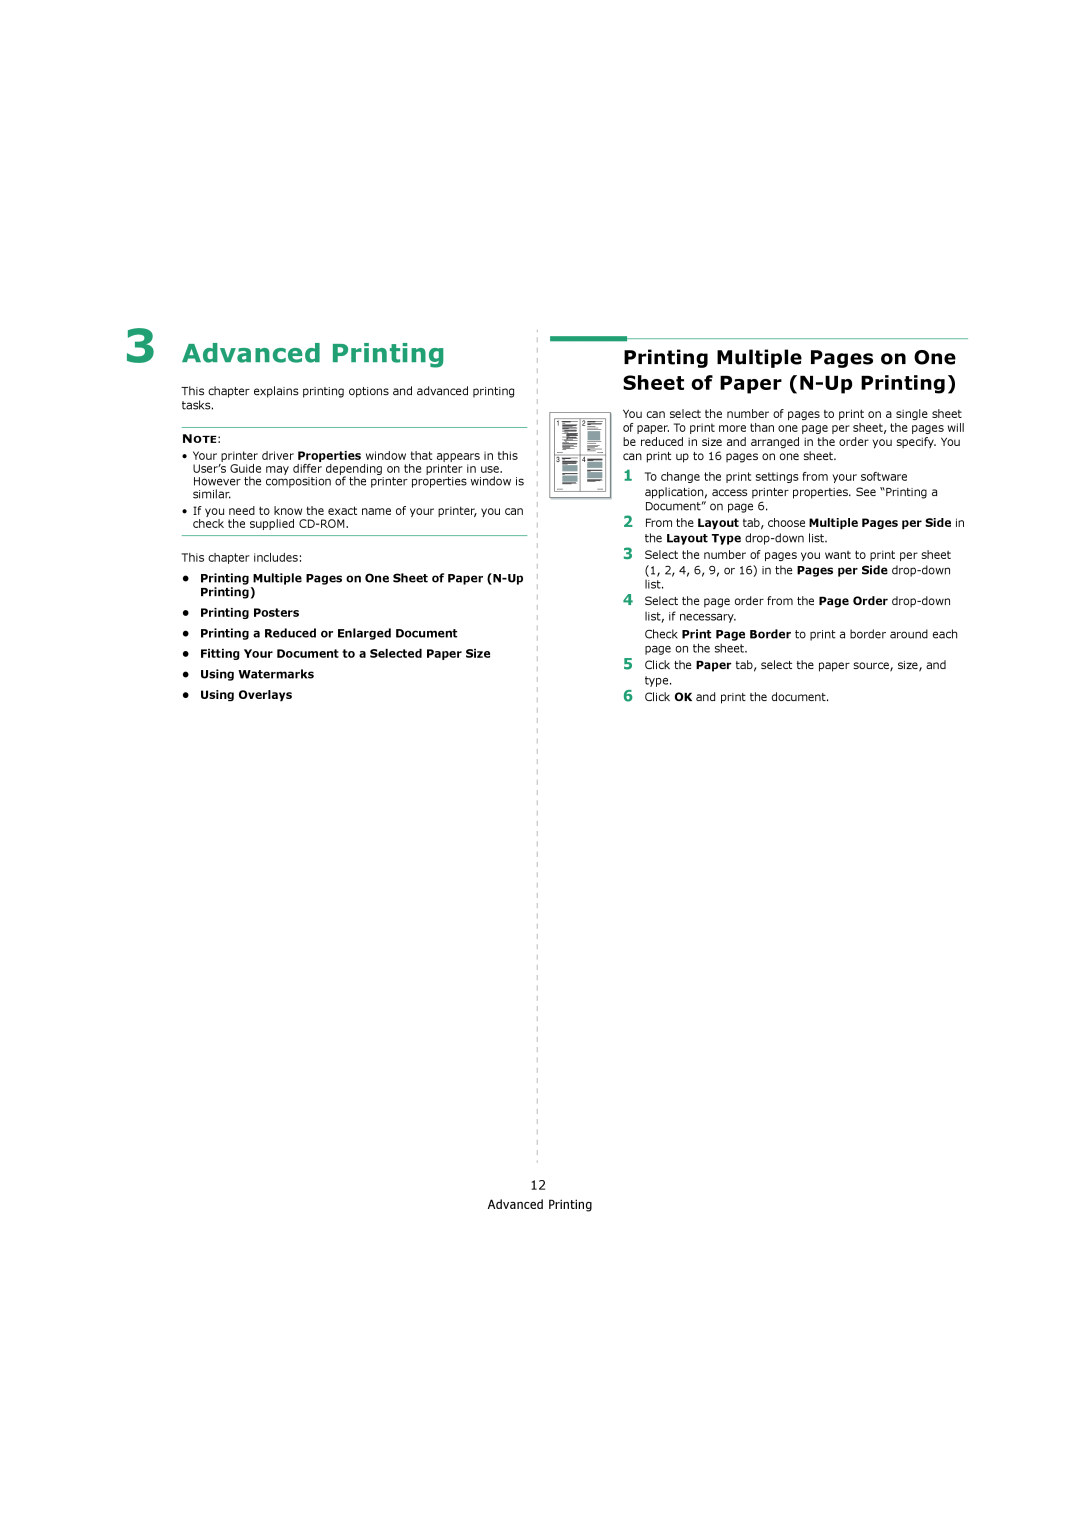 Xerox 3119 manual Advanced Printing, •Printing Posters, •Printing a Reduced or Enlarged Document 